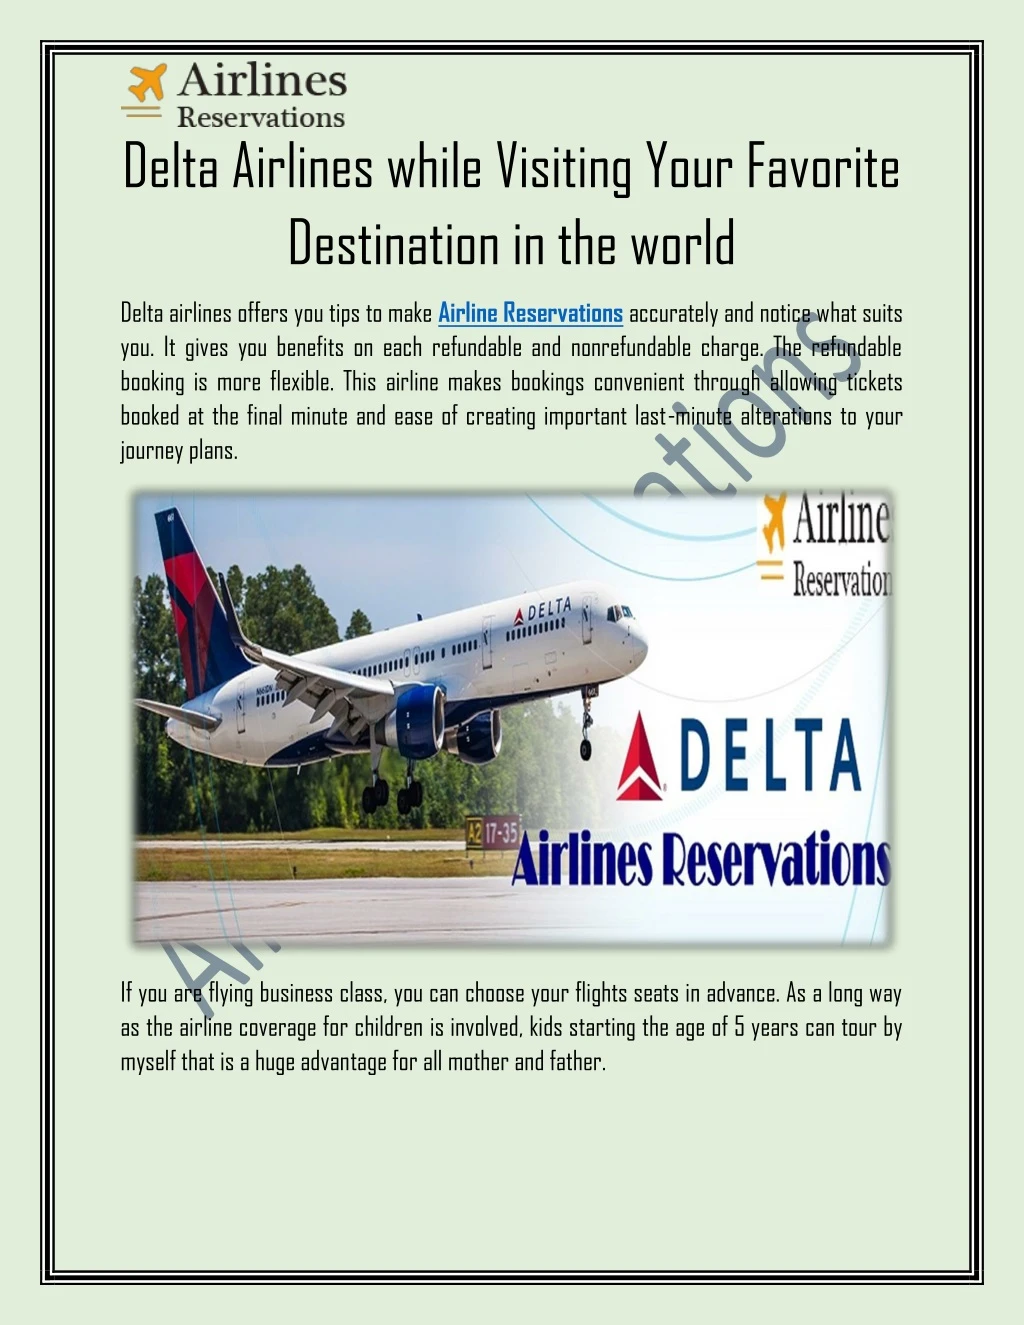 delta airlines while visiting your favorite